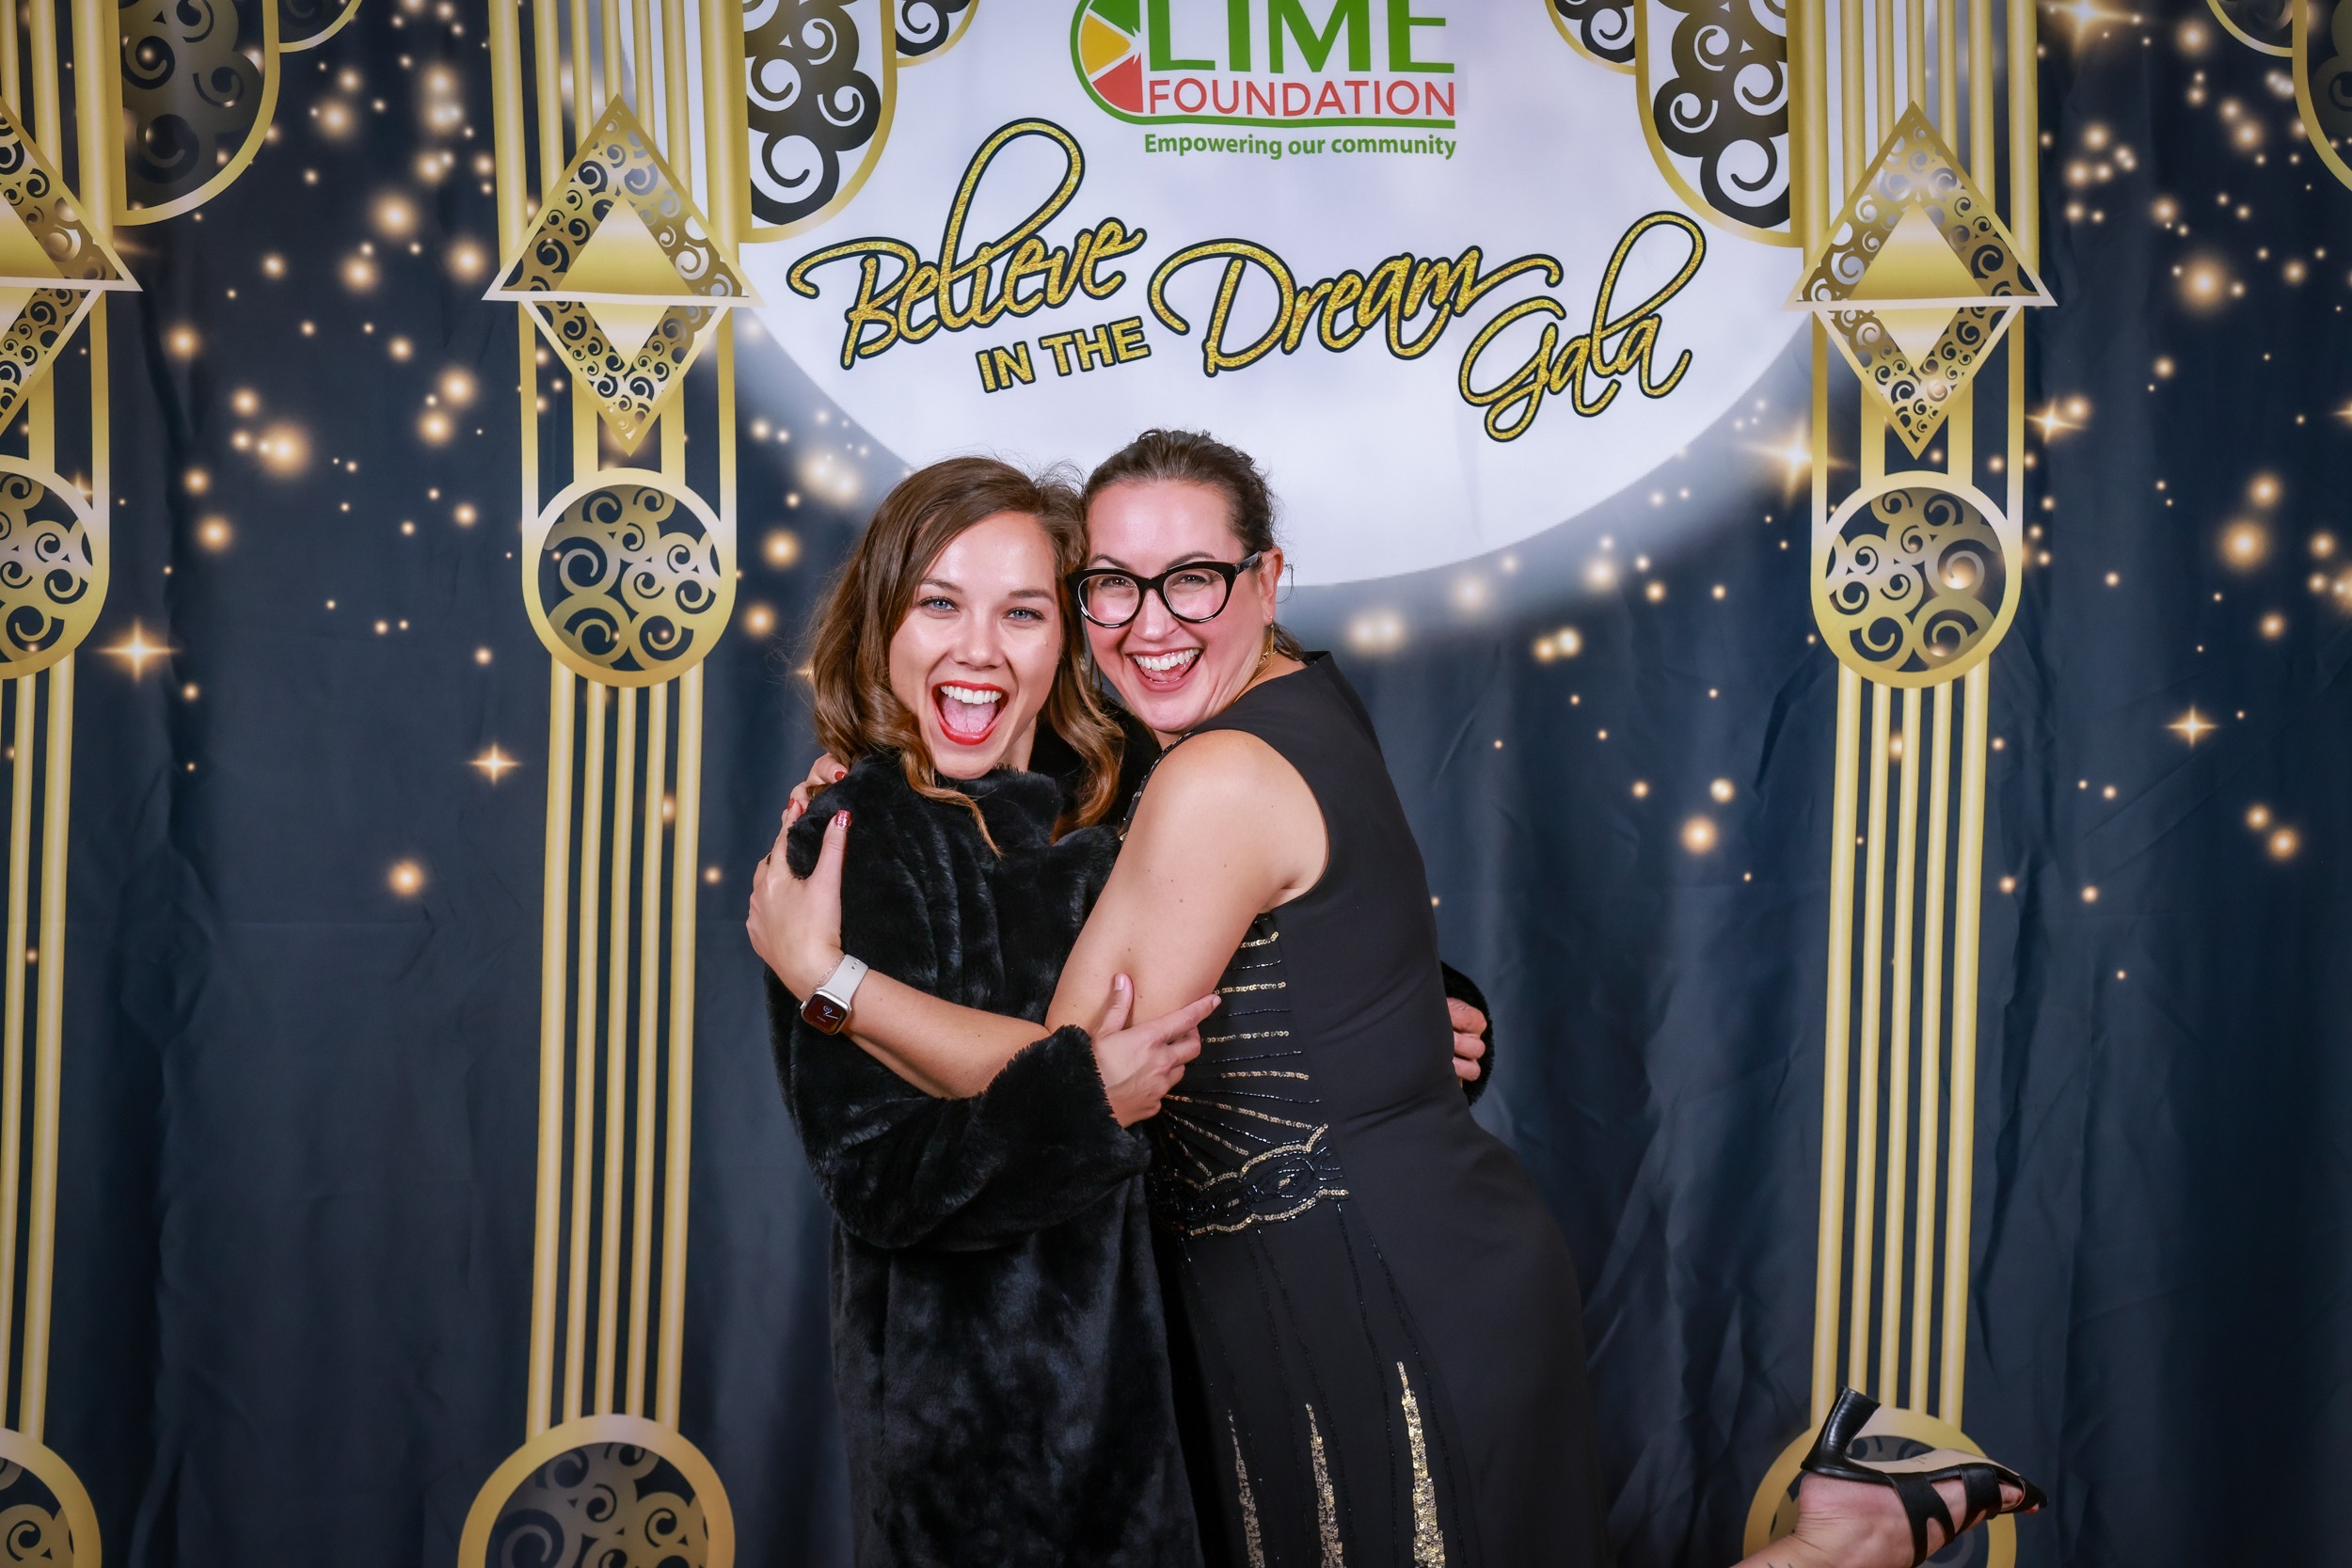 Two women from Sonoma County posing for a photo at a photo booth run by The LIME Foundation.